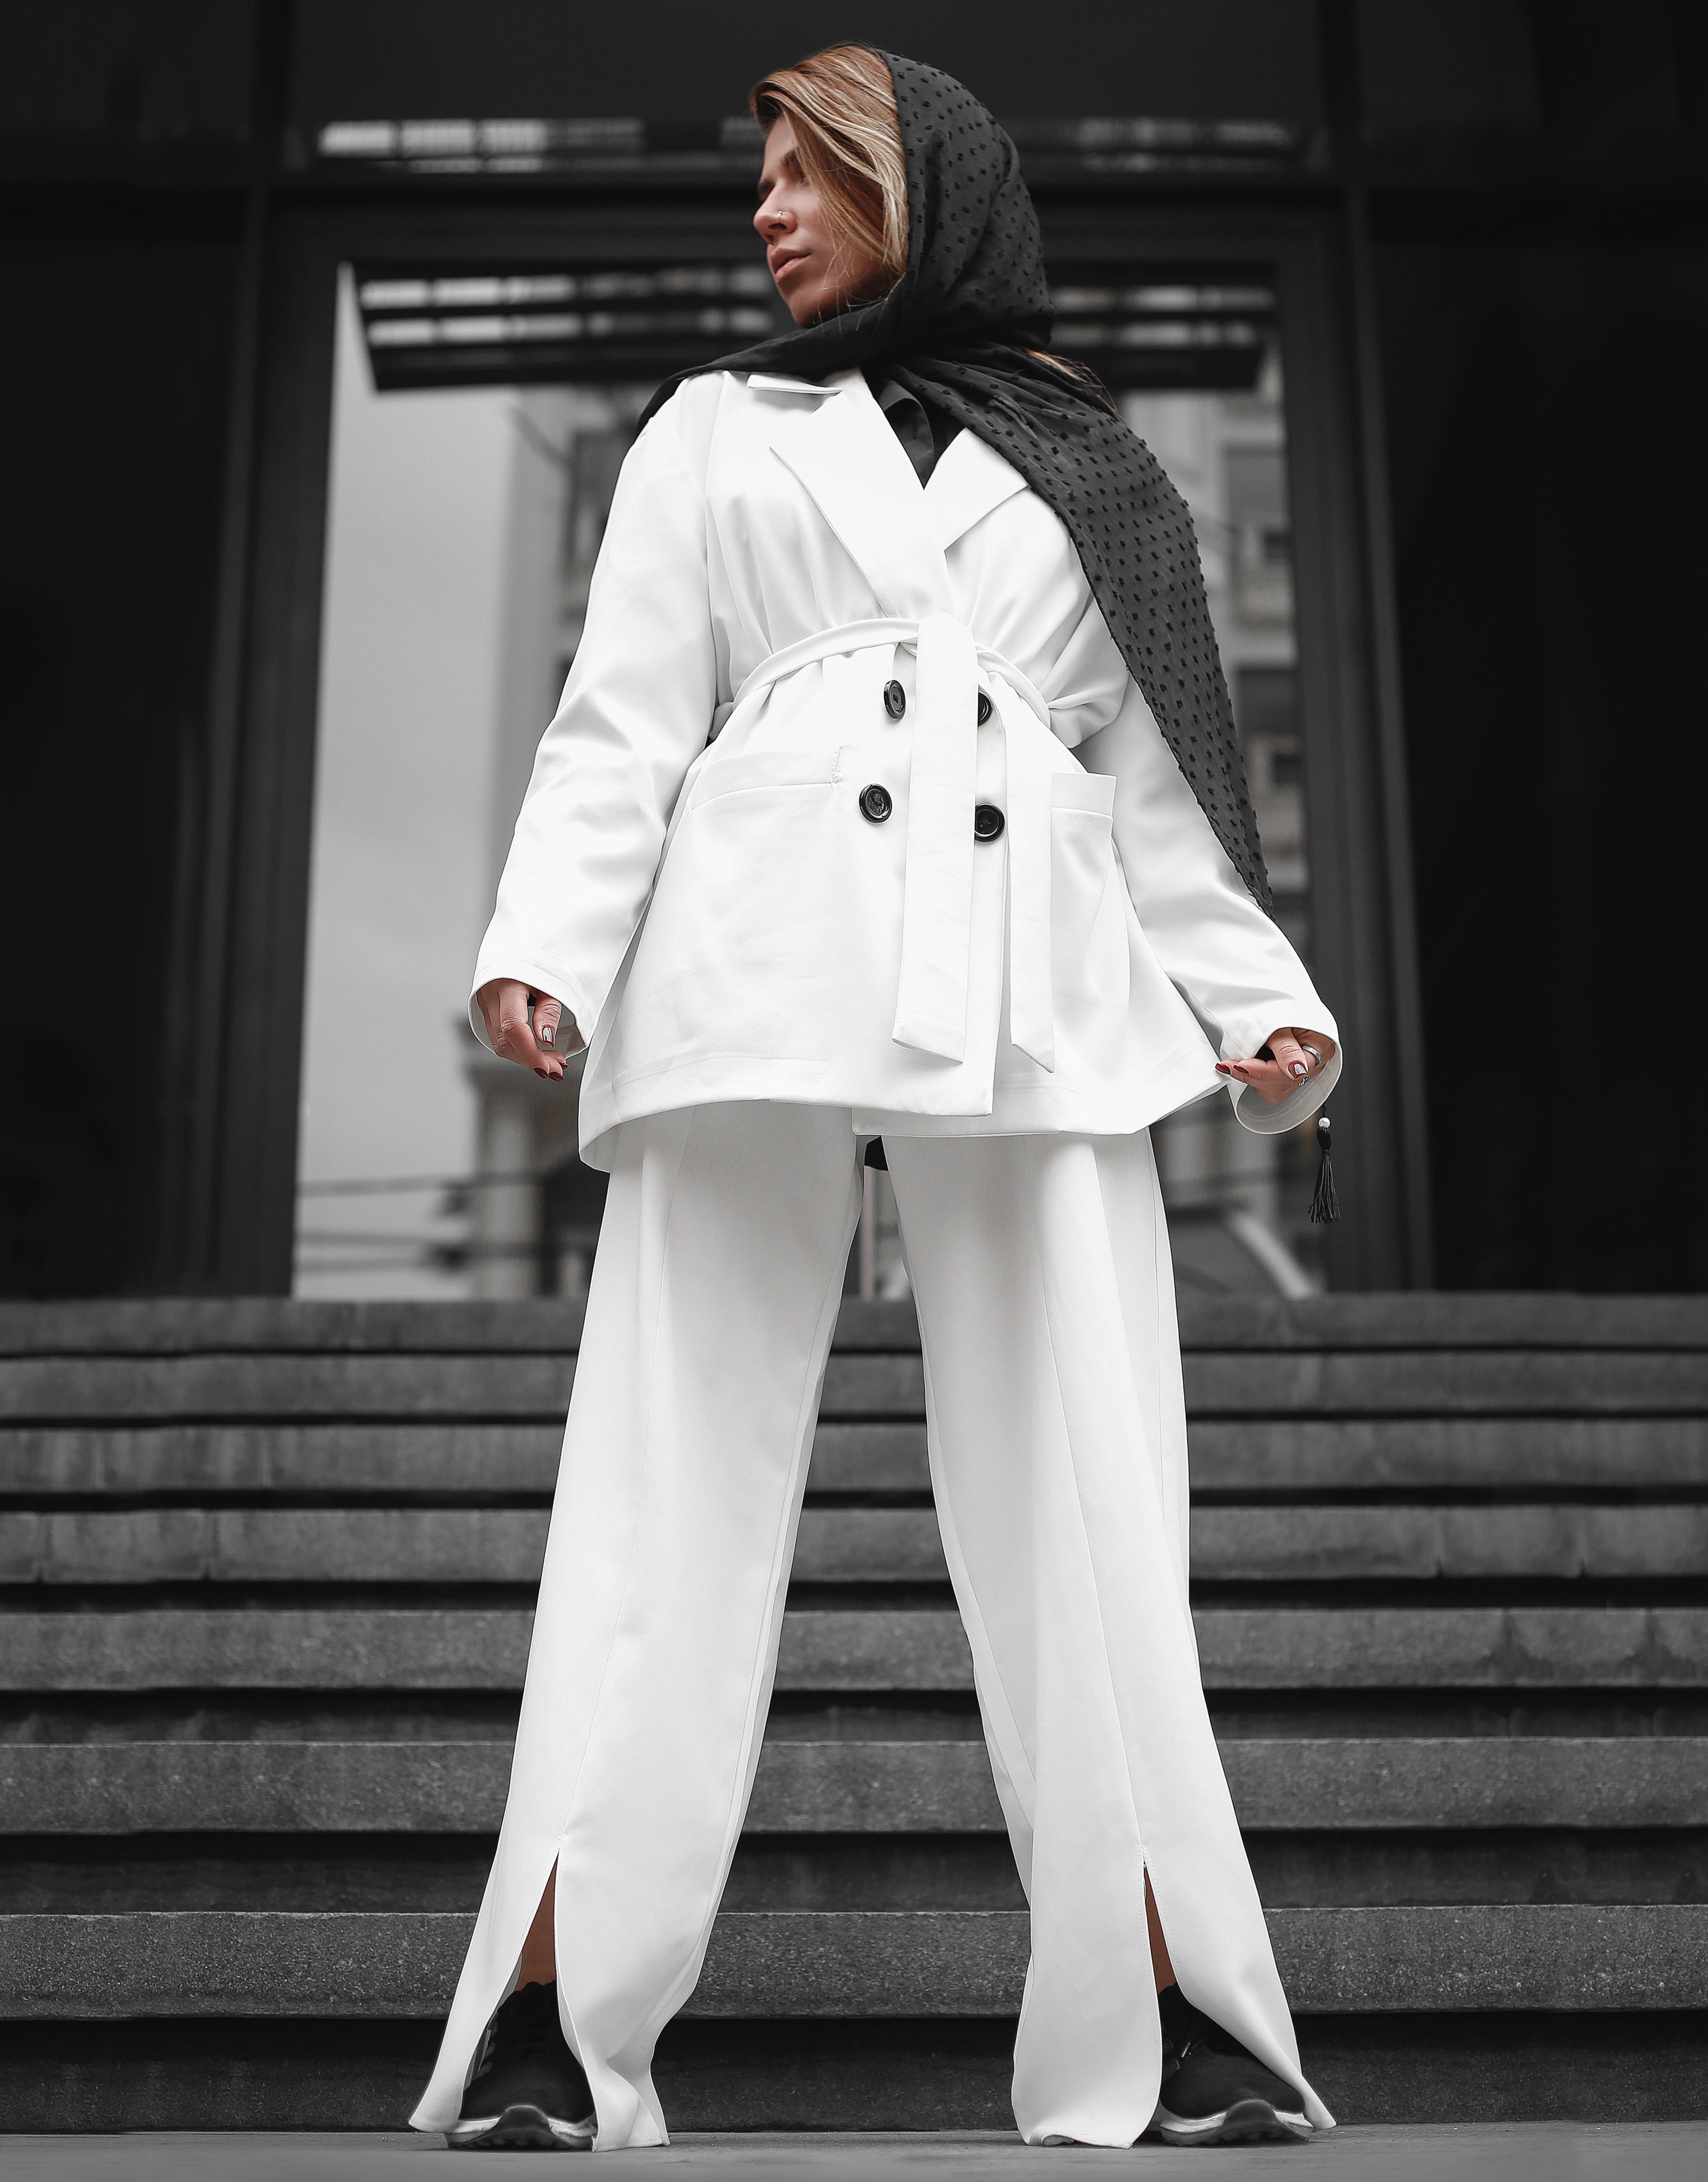 '60s revival and white monochrome outfits for AW21. Photo by Reza Delkhosh, Unsplash 